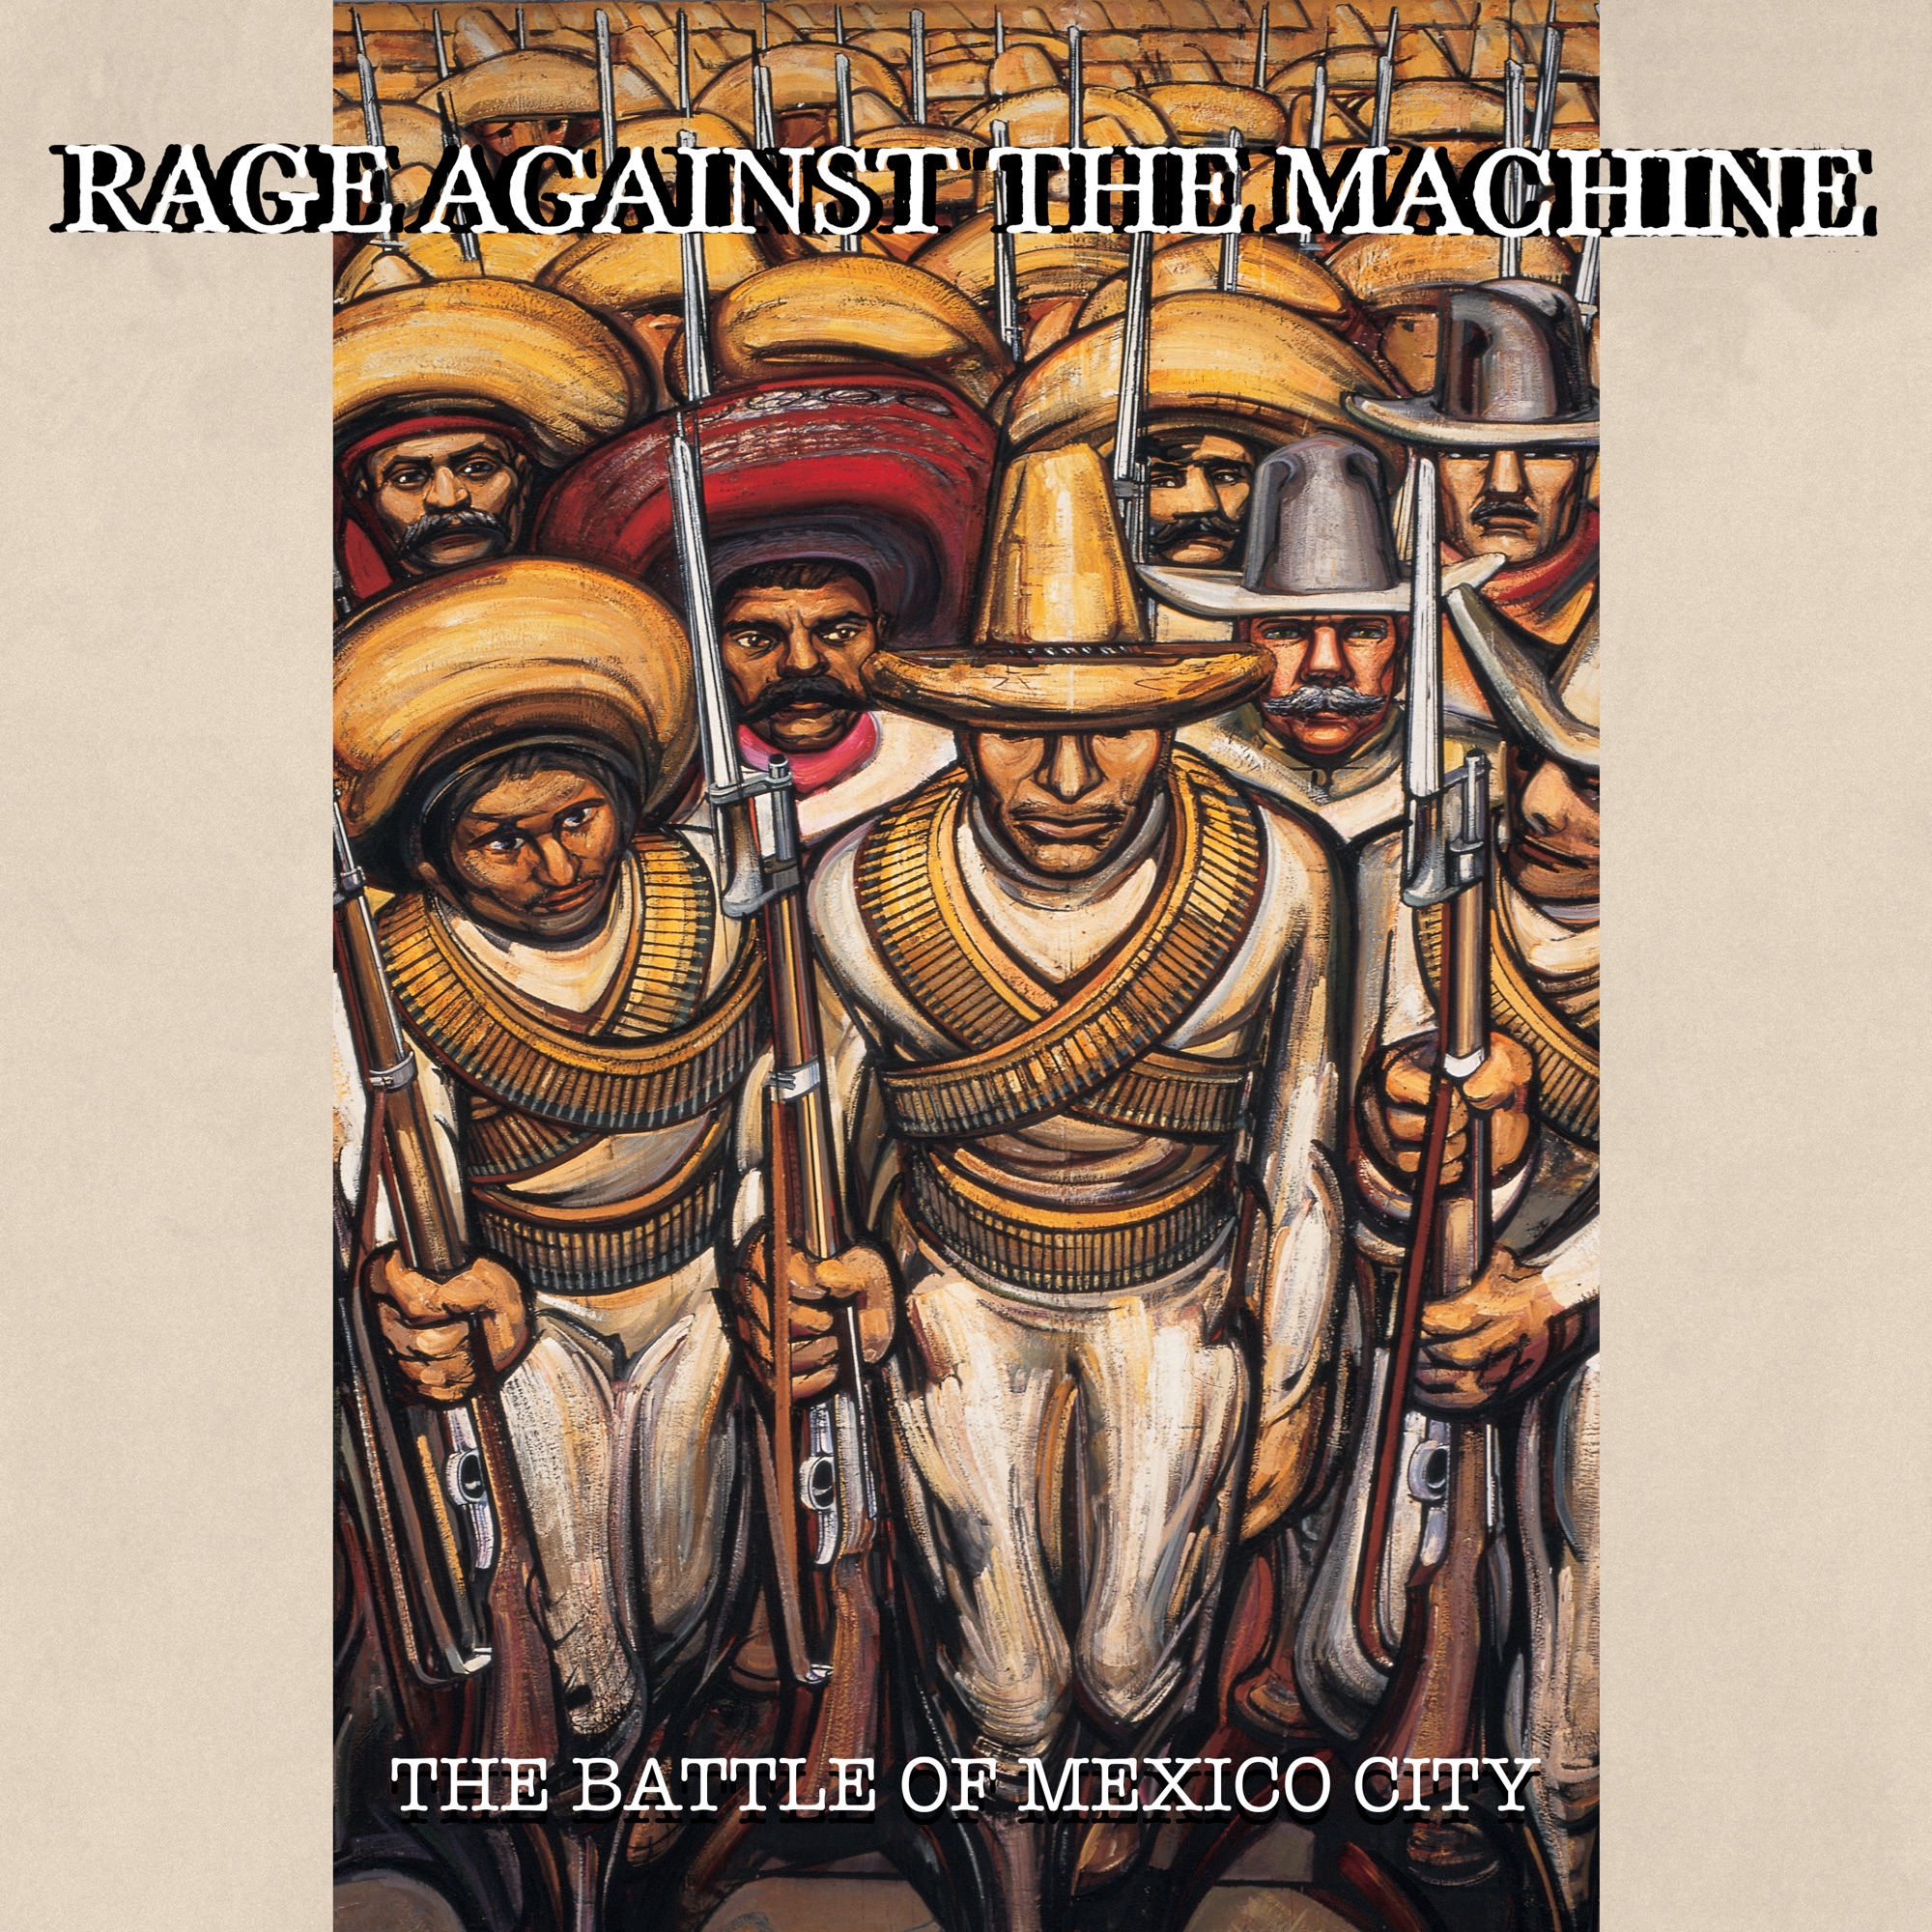 Rage Against the Machine - The Battle Of Mexico City (Live) [Explicit] [Clean] [Mastered for iTunes] (2001) - Album [iTunes Plus AAC M4A]